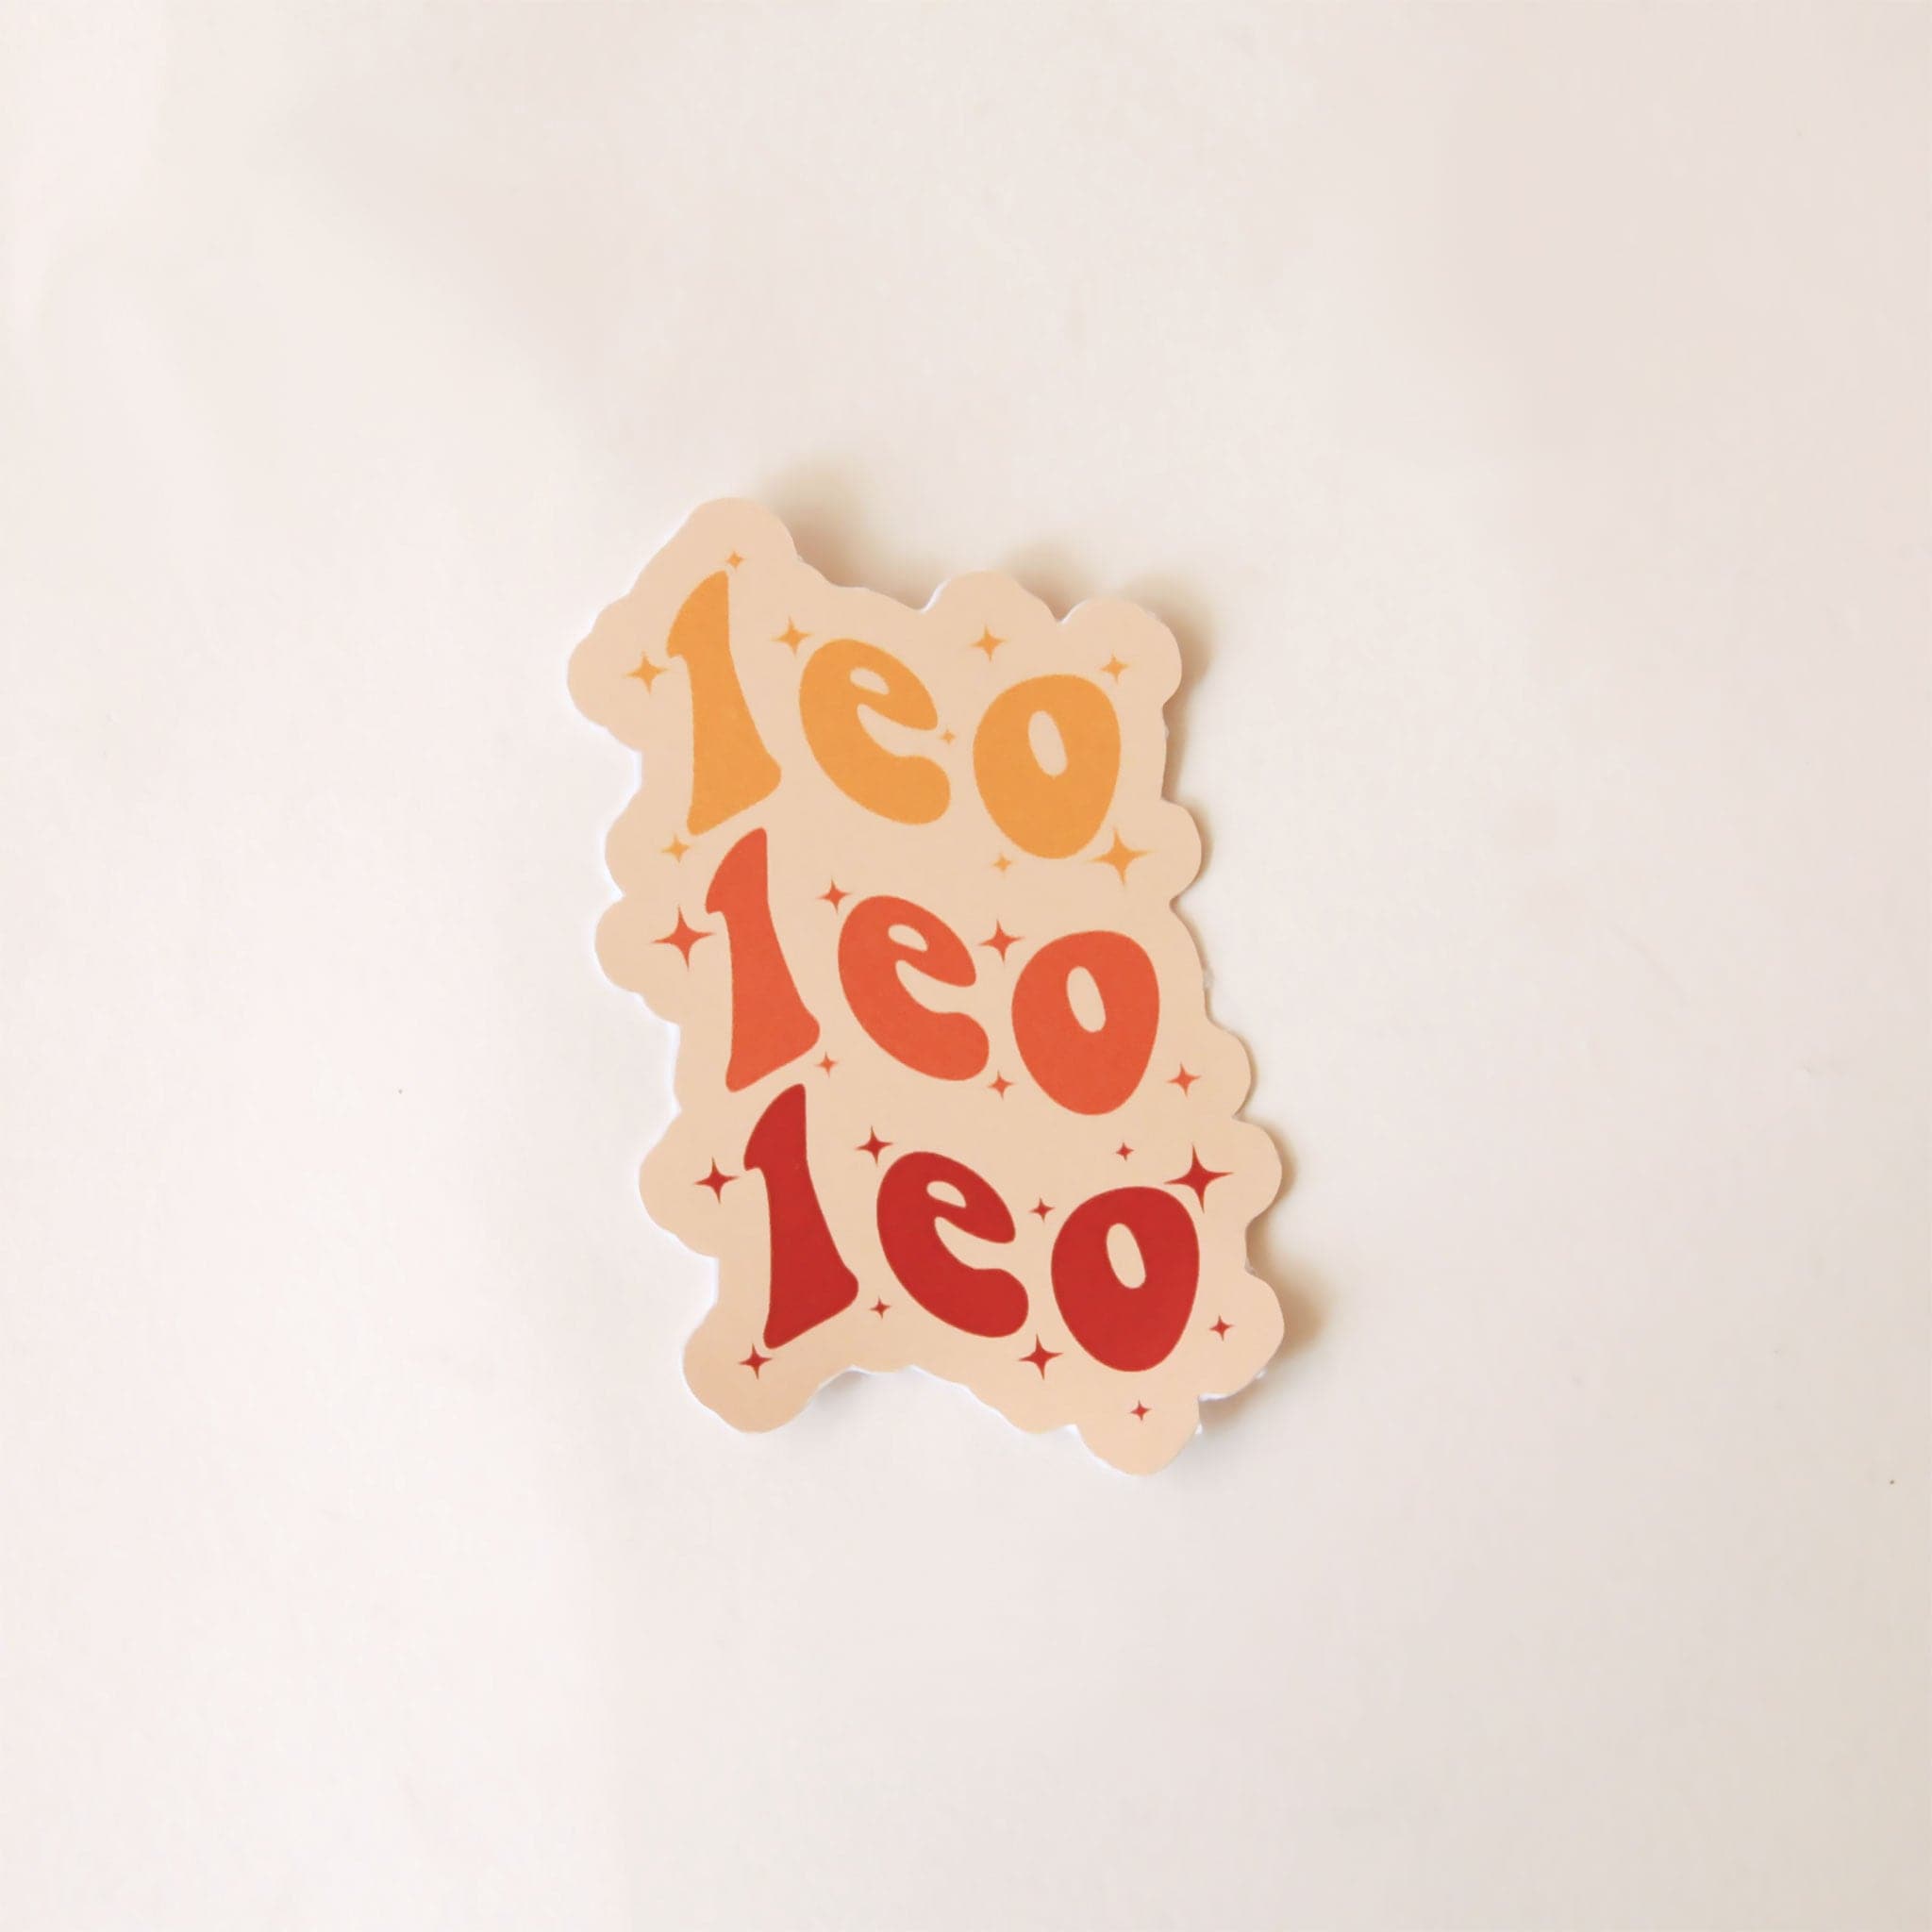 On a white background is a red and yellow sticker with the word &quot;Leo&quot; stacked on top of one another three times in a wavy design. 